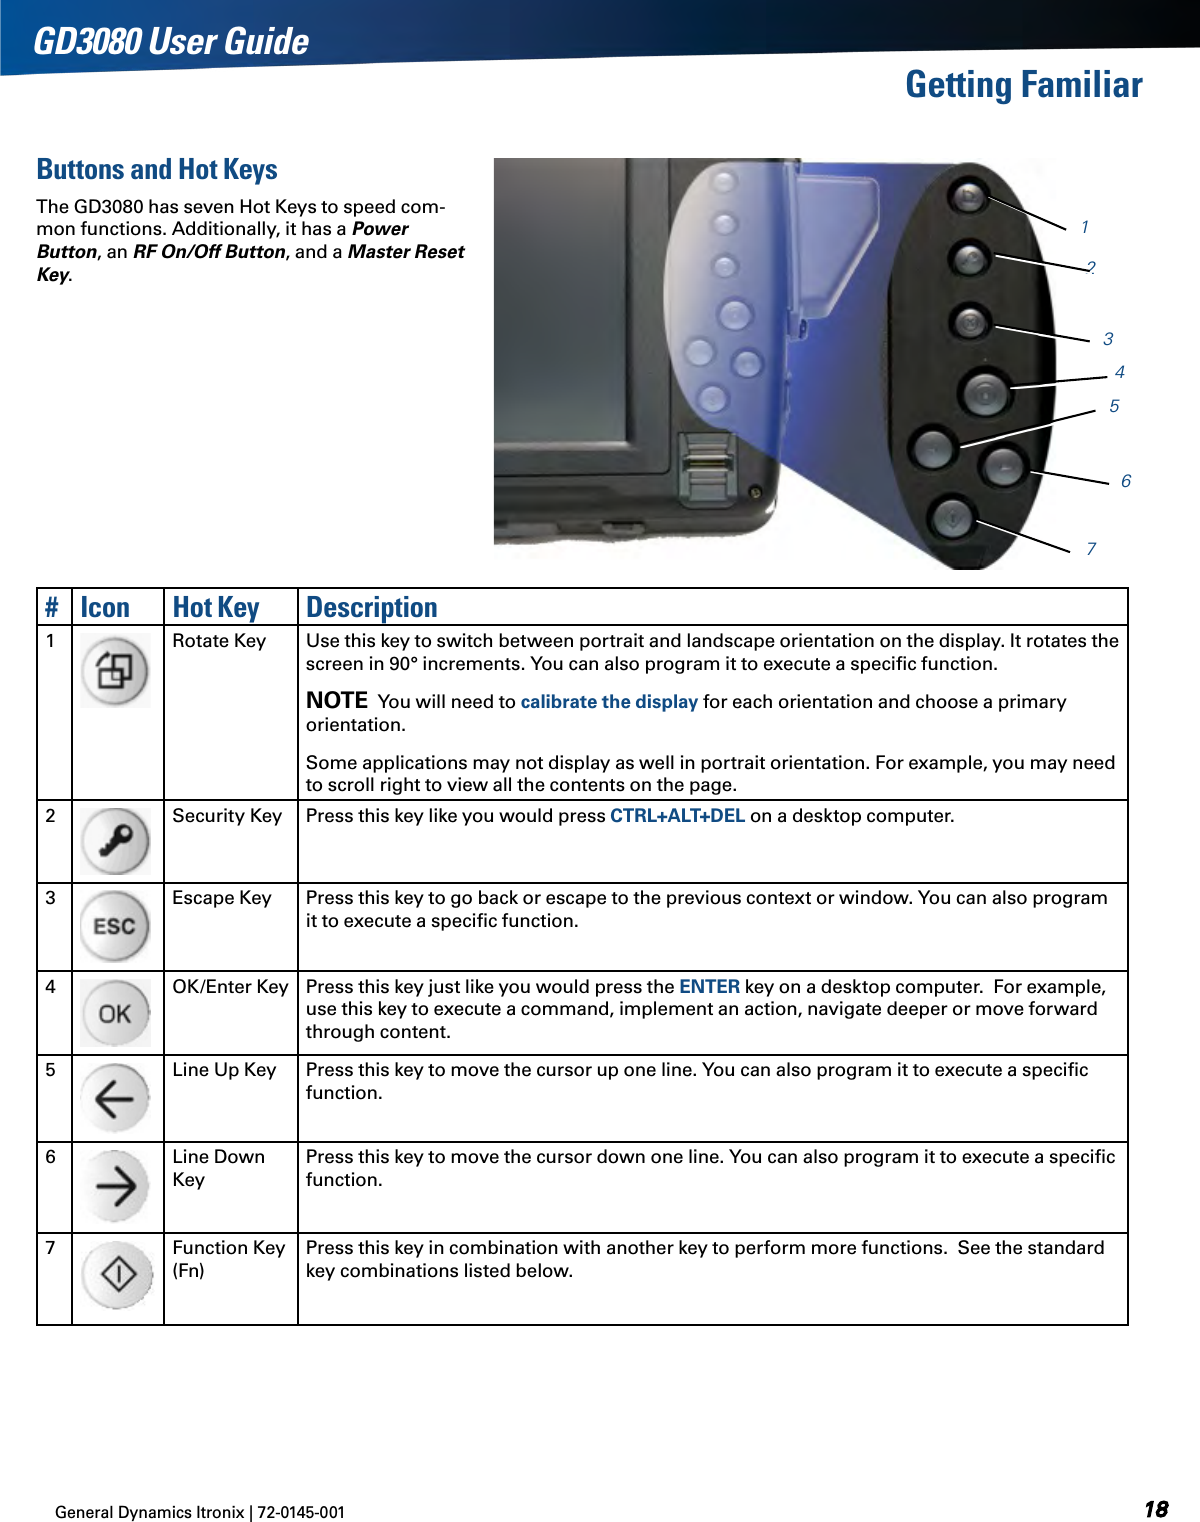 General Dynamics Itronix | 72-0145-001GD3080 User GuideGetting FamiliarButtons and Hot KeysThe GD3080 has seven Hot Keys to speed com-mon functions. Additionally, it has a Power Button, an RF On/Off Button, and a Master Reset Key.#Icon Hot Key Description1Rotate Key Use this key to switch between portrait and landscape orientation on the display. It rotates the screen in 90° increments. You can also program it to execute a speciﬁc function.note  You will need to calibrate the display for each orientation and choose a primary orientation.Some applications may not display as well in portrait orientation. For example, you may need to scroll right to view all the contents on the page.2Security Key Press this key like you would press CTRL+ALT+DEL on a desktop computer.3Escape Key Press this key to go back or escape to the previous context or window. You can also program it to execute a speciﬁc function.4OK/Enter Key Press this key just like you would press the ENTER key on a desktop computer.  For example, use this key to execute a command, implement an action, navigate deeper or move forward through content.5Line Up Key Press this key to move the cursor up one line. You can also program it to execute a speciﬁc function.6Line Down KeyPress this key to move the cursor down one line. You can also program it to execute a speciﬁc function.7Function Key (Fn)Press this key in combination with another key to perform more functions.  See the standard key combinations listed below.7654321